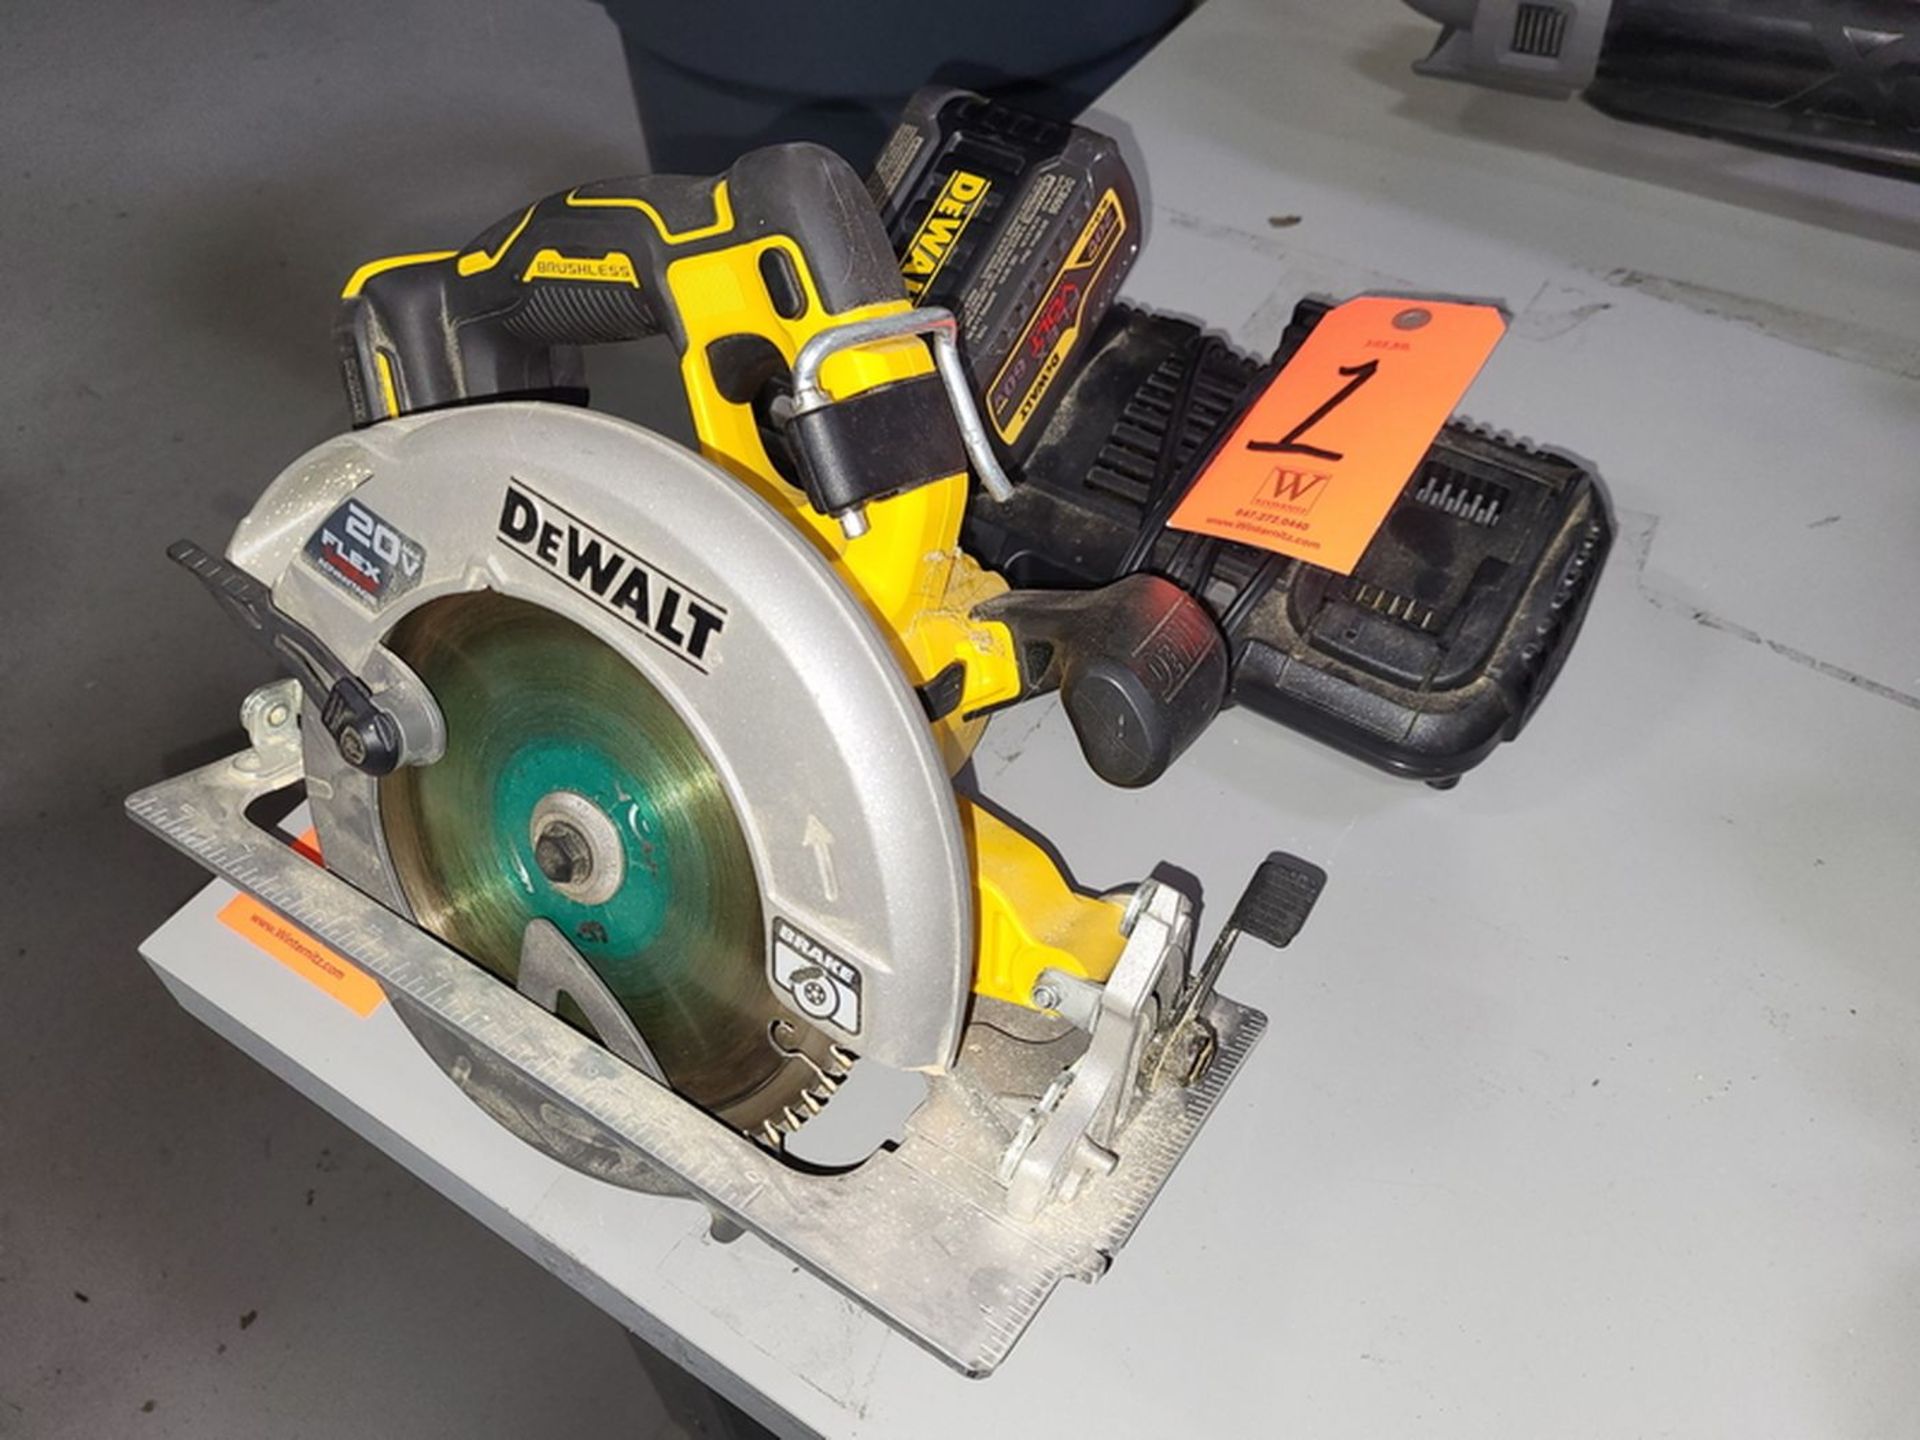 DeWalt 7-1/4 in. Cordless Circular Saw; 20-Volt Max., Includes Battery & Charger